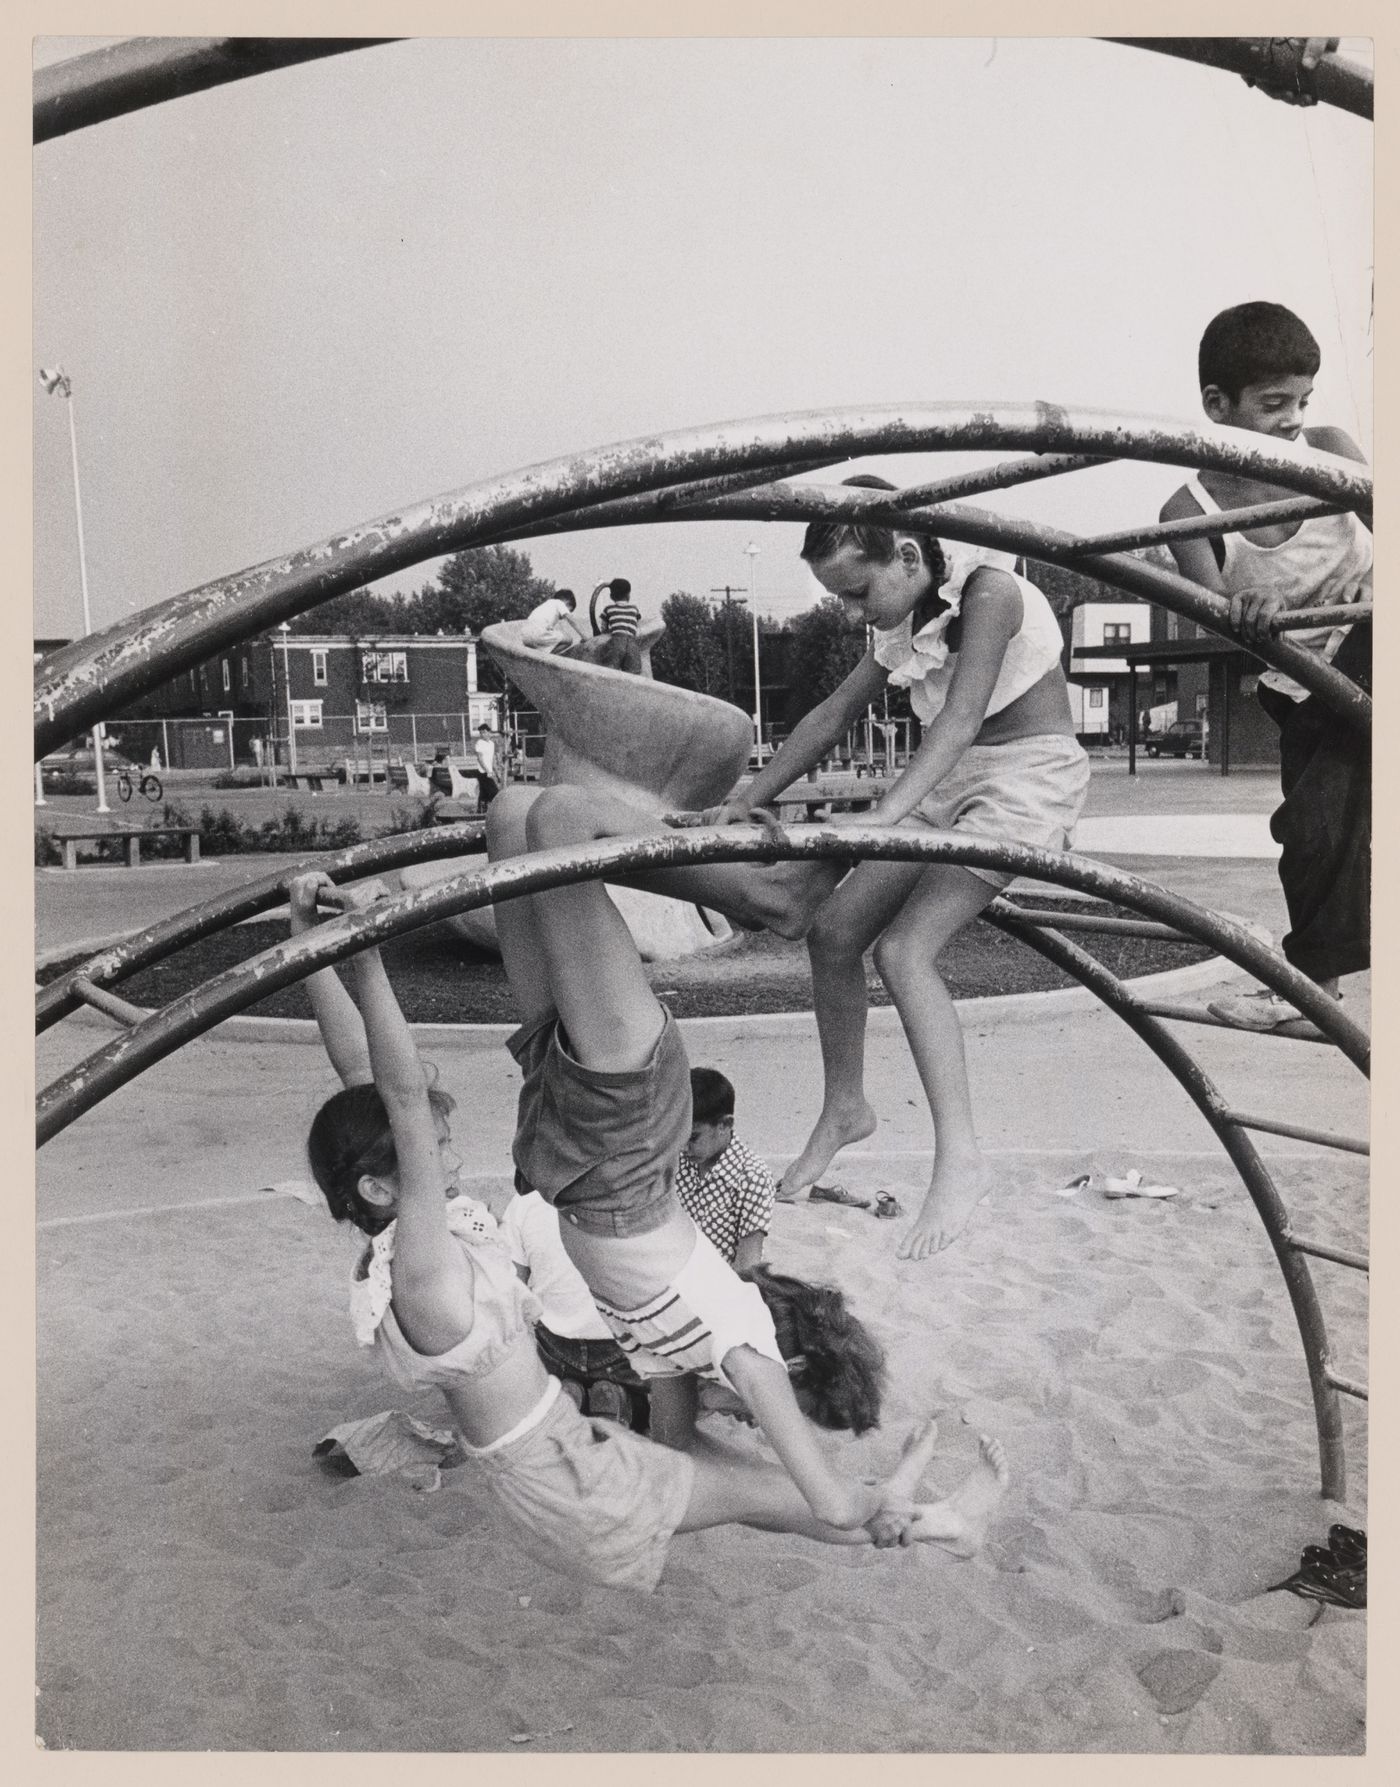 View of children playing in recreational area, 18th and Bigler Streets, Philadelphia, Pennsylvania